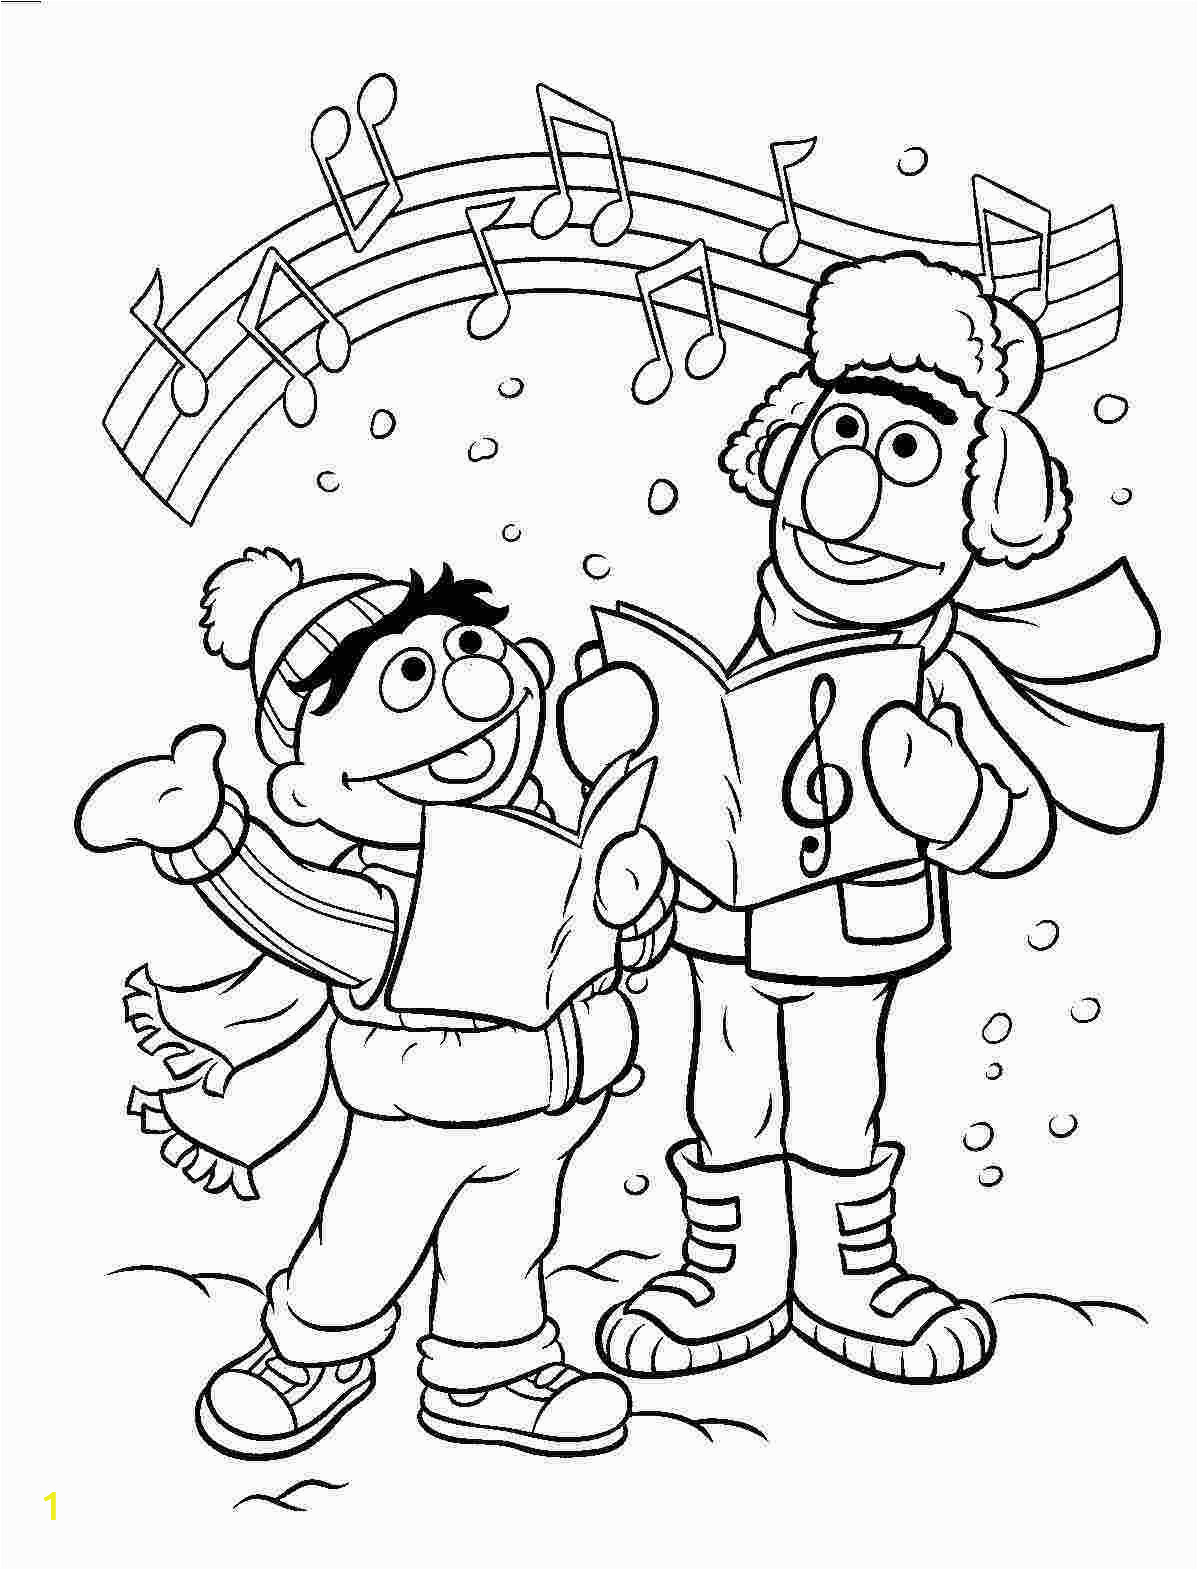 Free Printable Sesame Street Coloring Pages Sesame Street Coloring Pages Pinterest Sketch Coloring Page